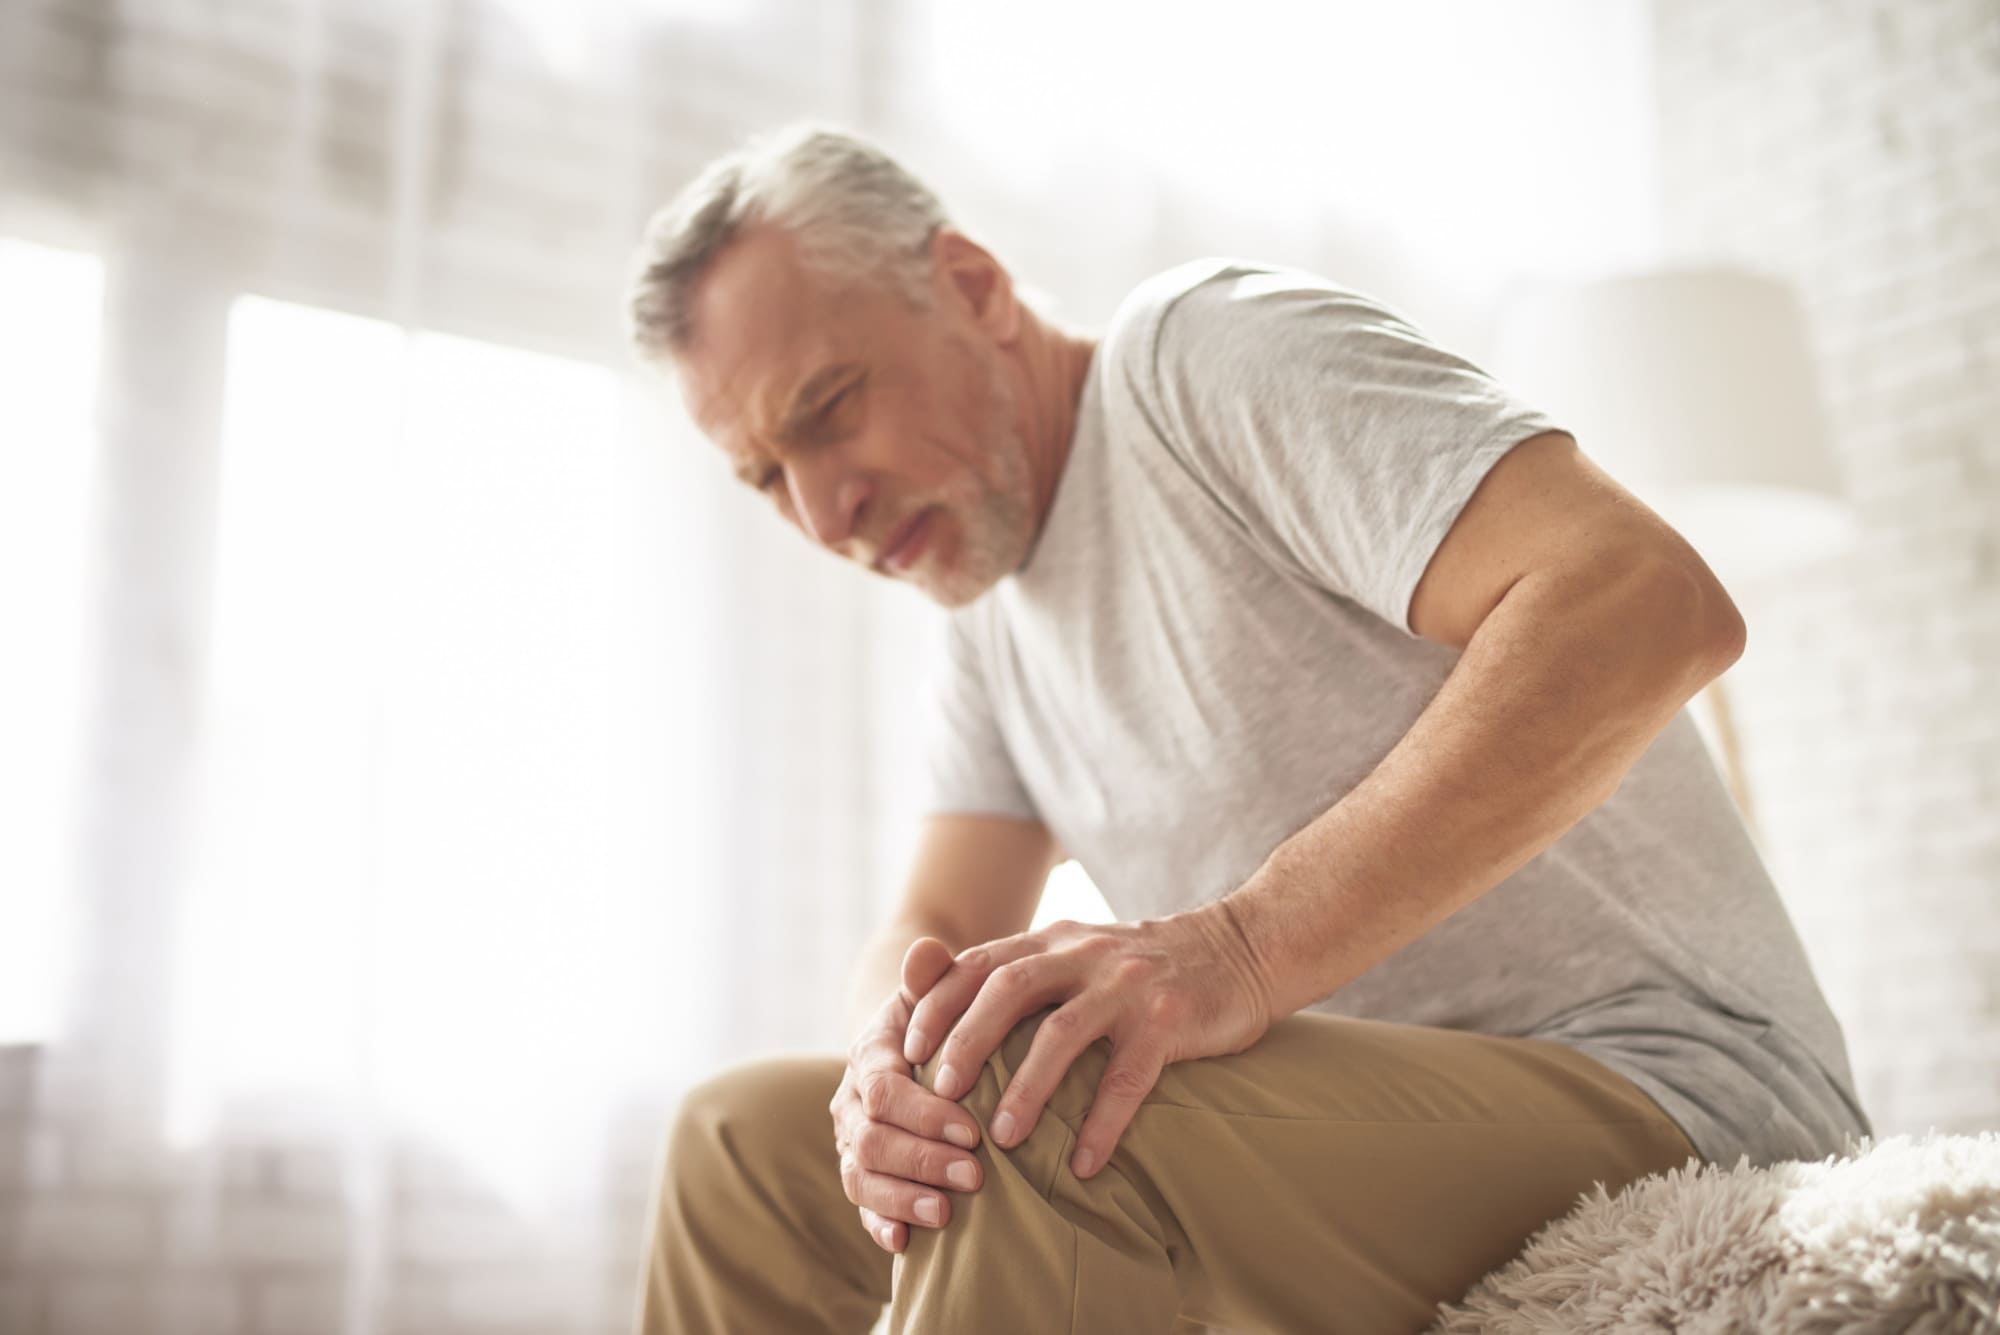 retired-man-pensioner-suffering-knee-pain-at-home _1_